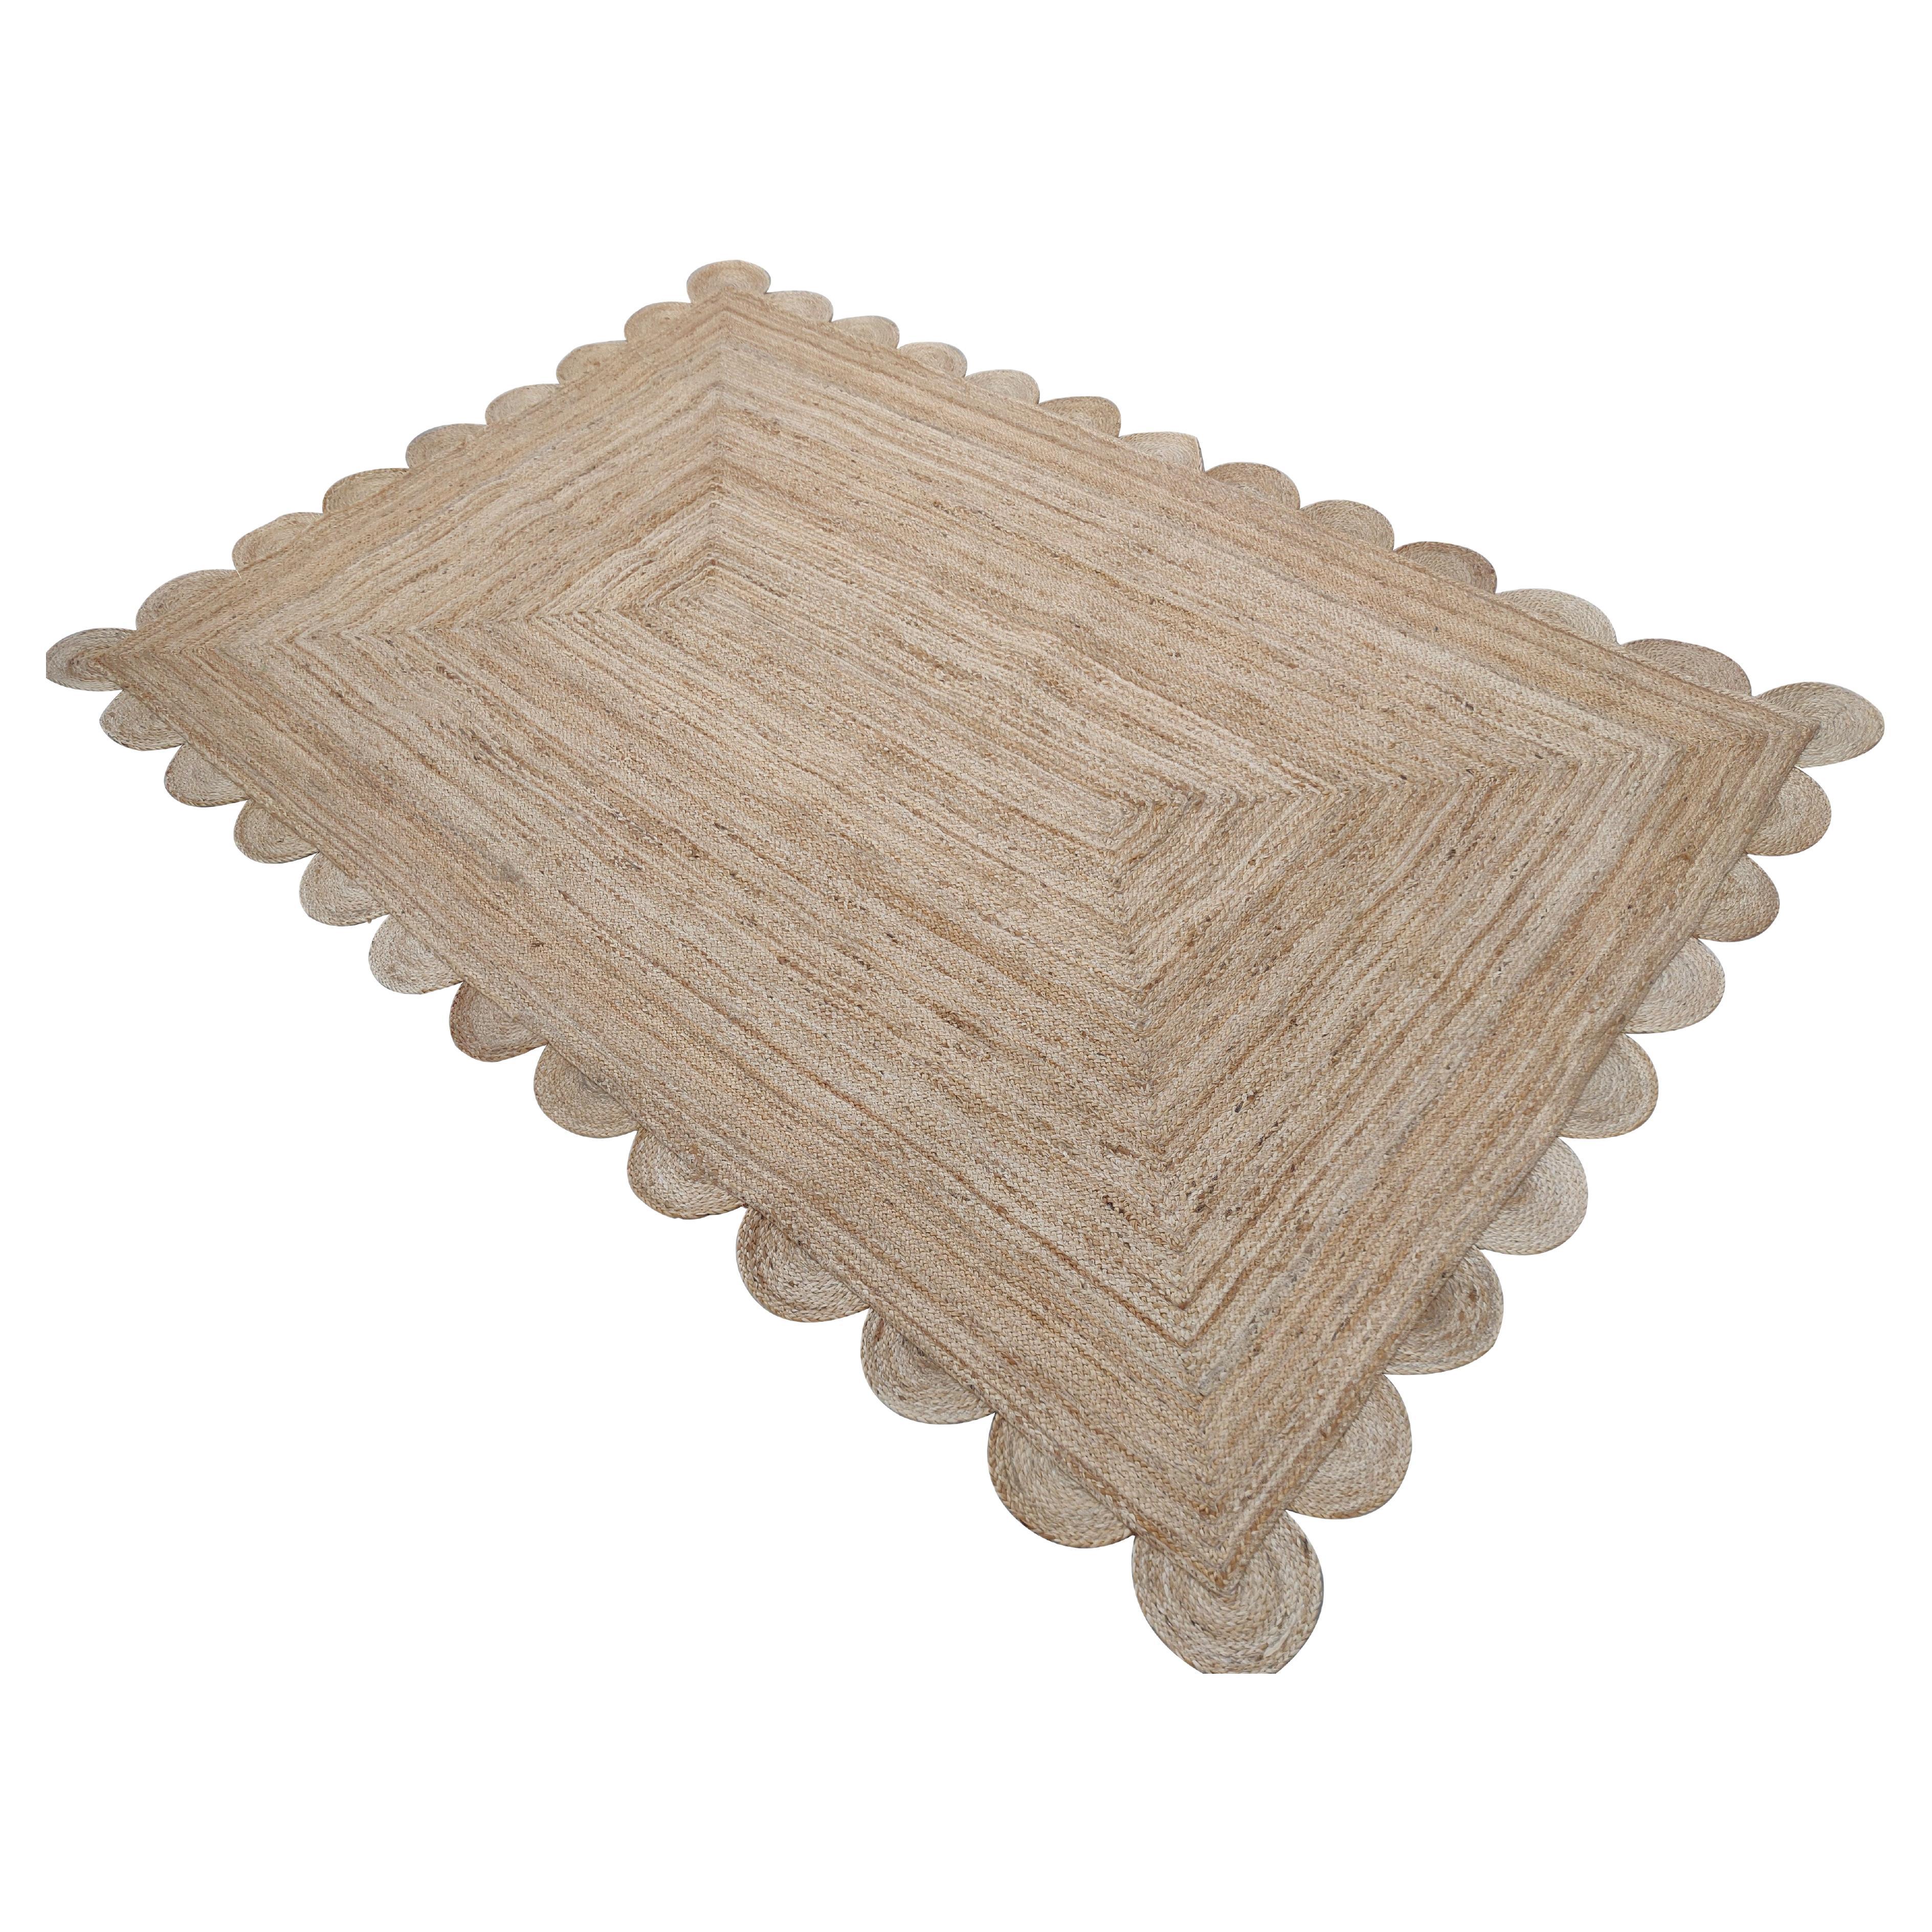 Handmade Jute Area Flat Weave Rug, 6x9 Solid Jute Scalloped Indian Dhurrie Rug For Sale